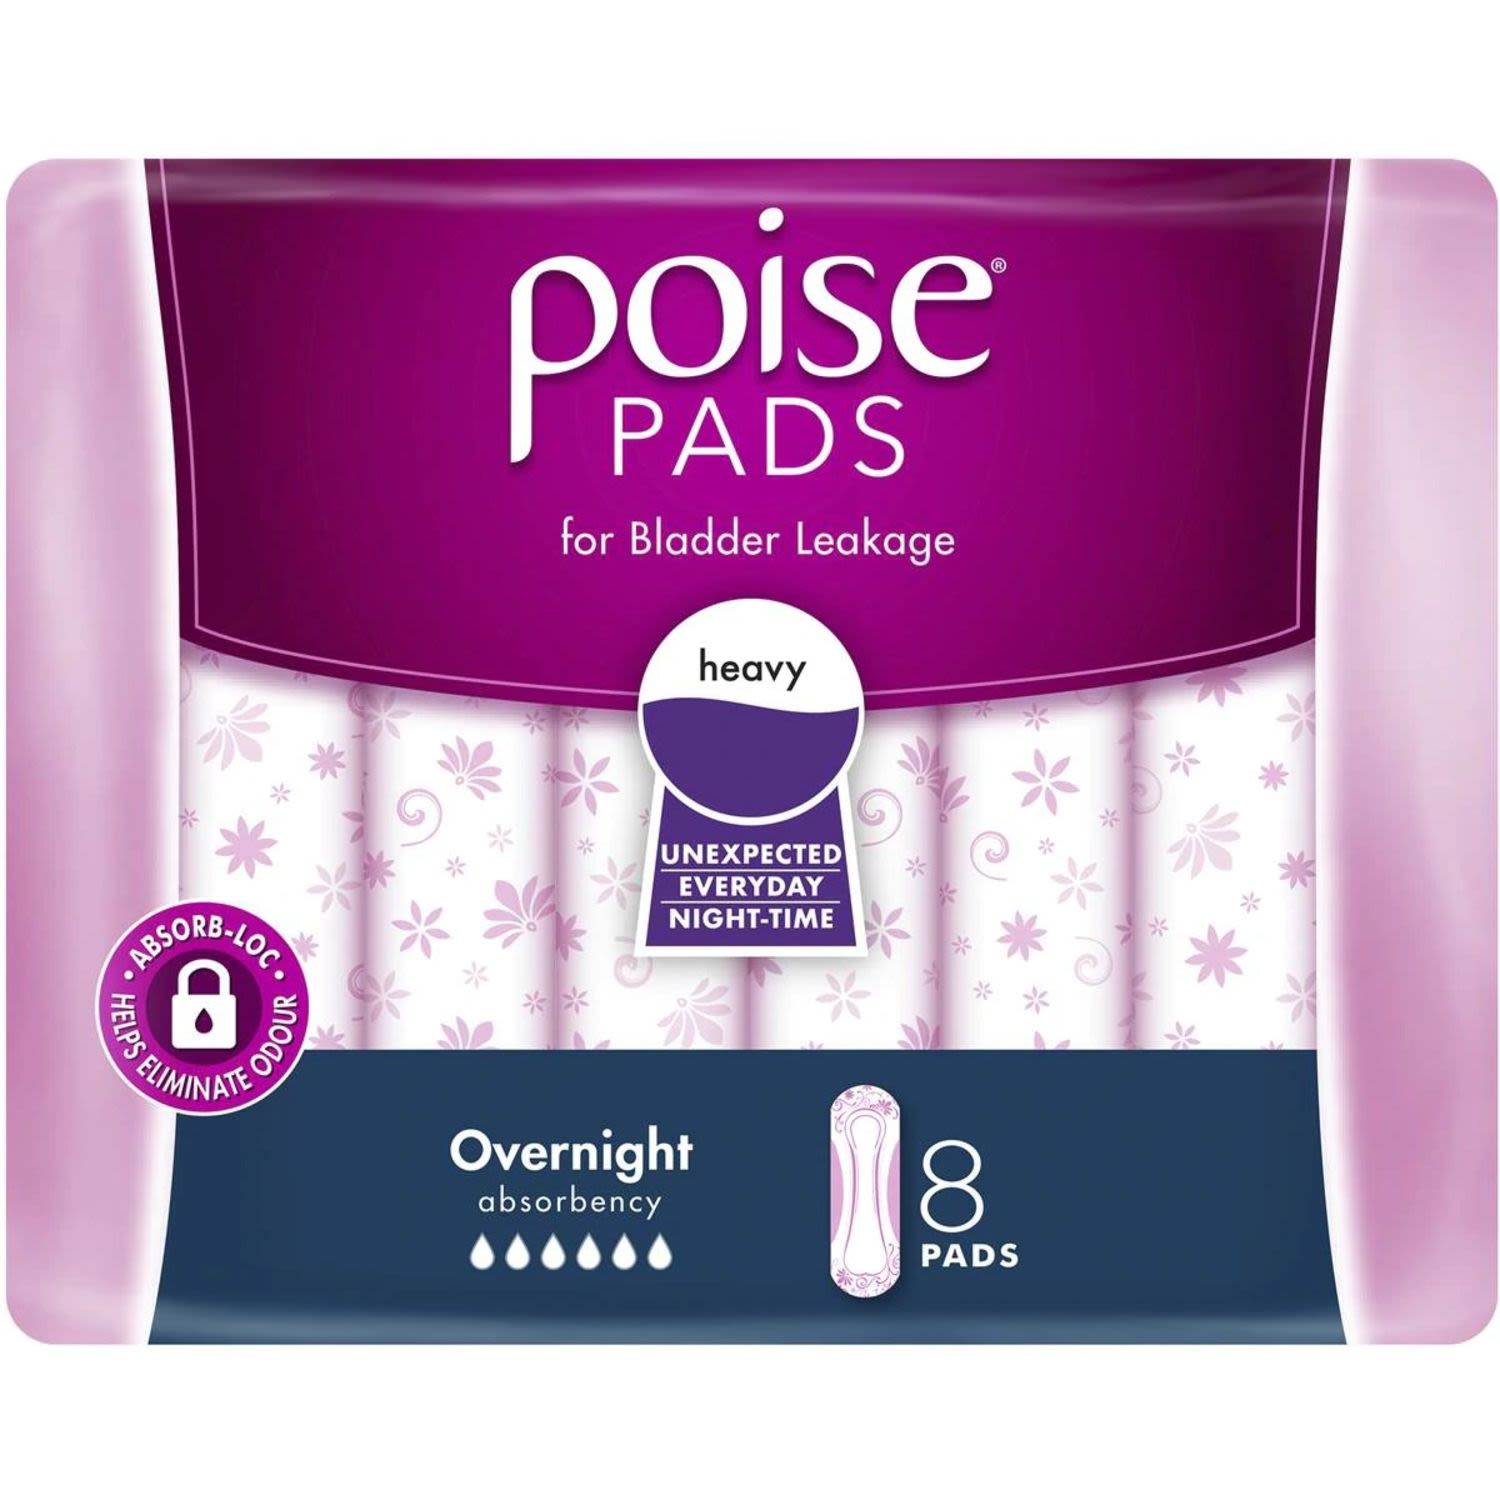 Poise Incontinence Pads Overnight Absorbency, 8 Each